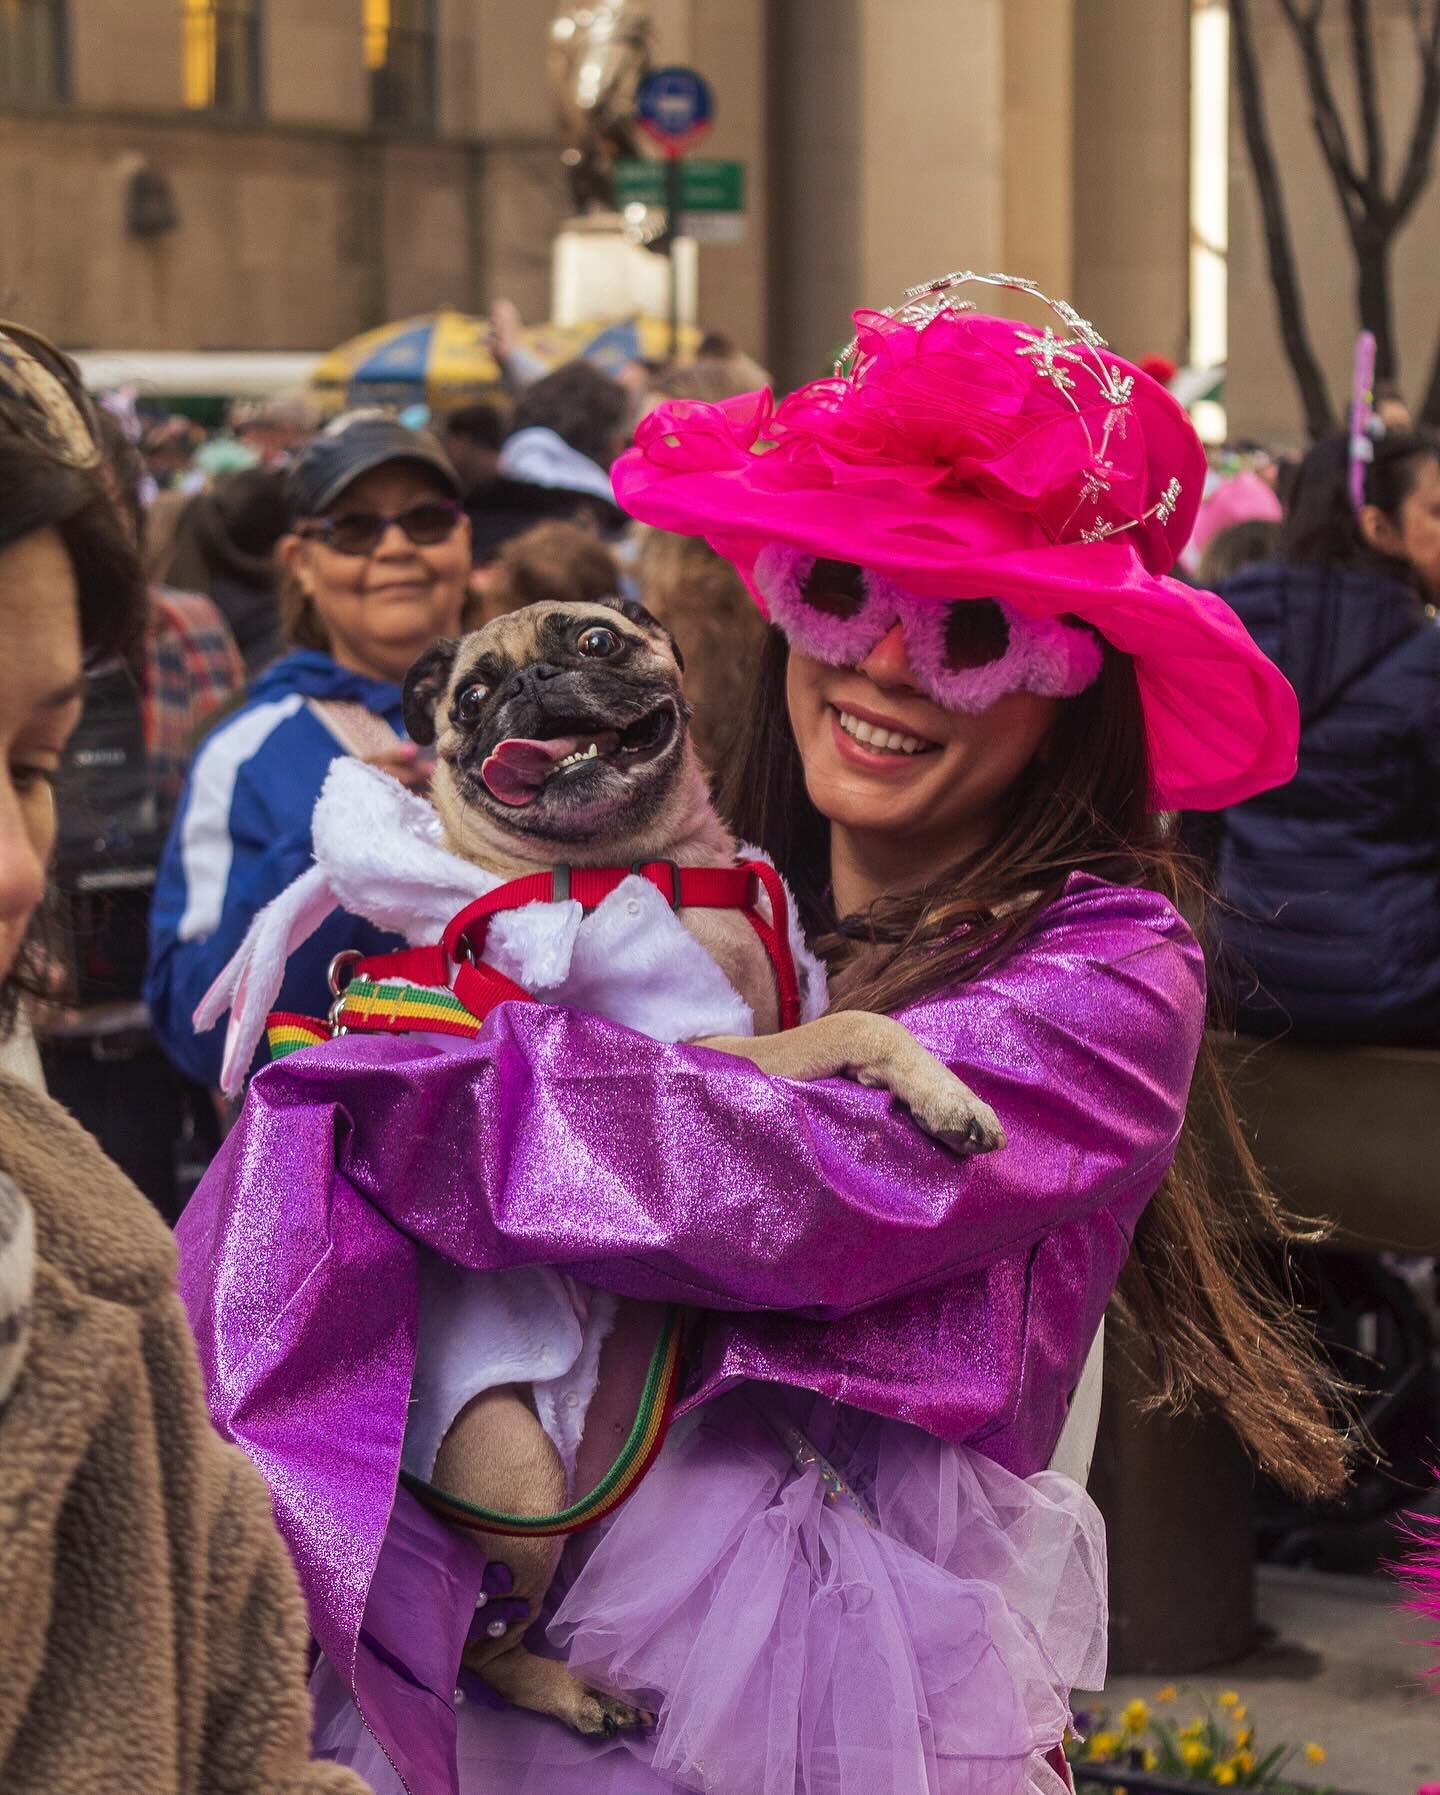 Some of the scenes from the #Easter Parade and Bonnet Festival in #nyc 🐣 a tradition going back to the 1800s
&mdash;&mdash;&mdash;
#happyeaster #streetphotography #parade #puglove #canonphotography